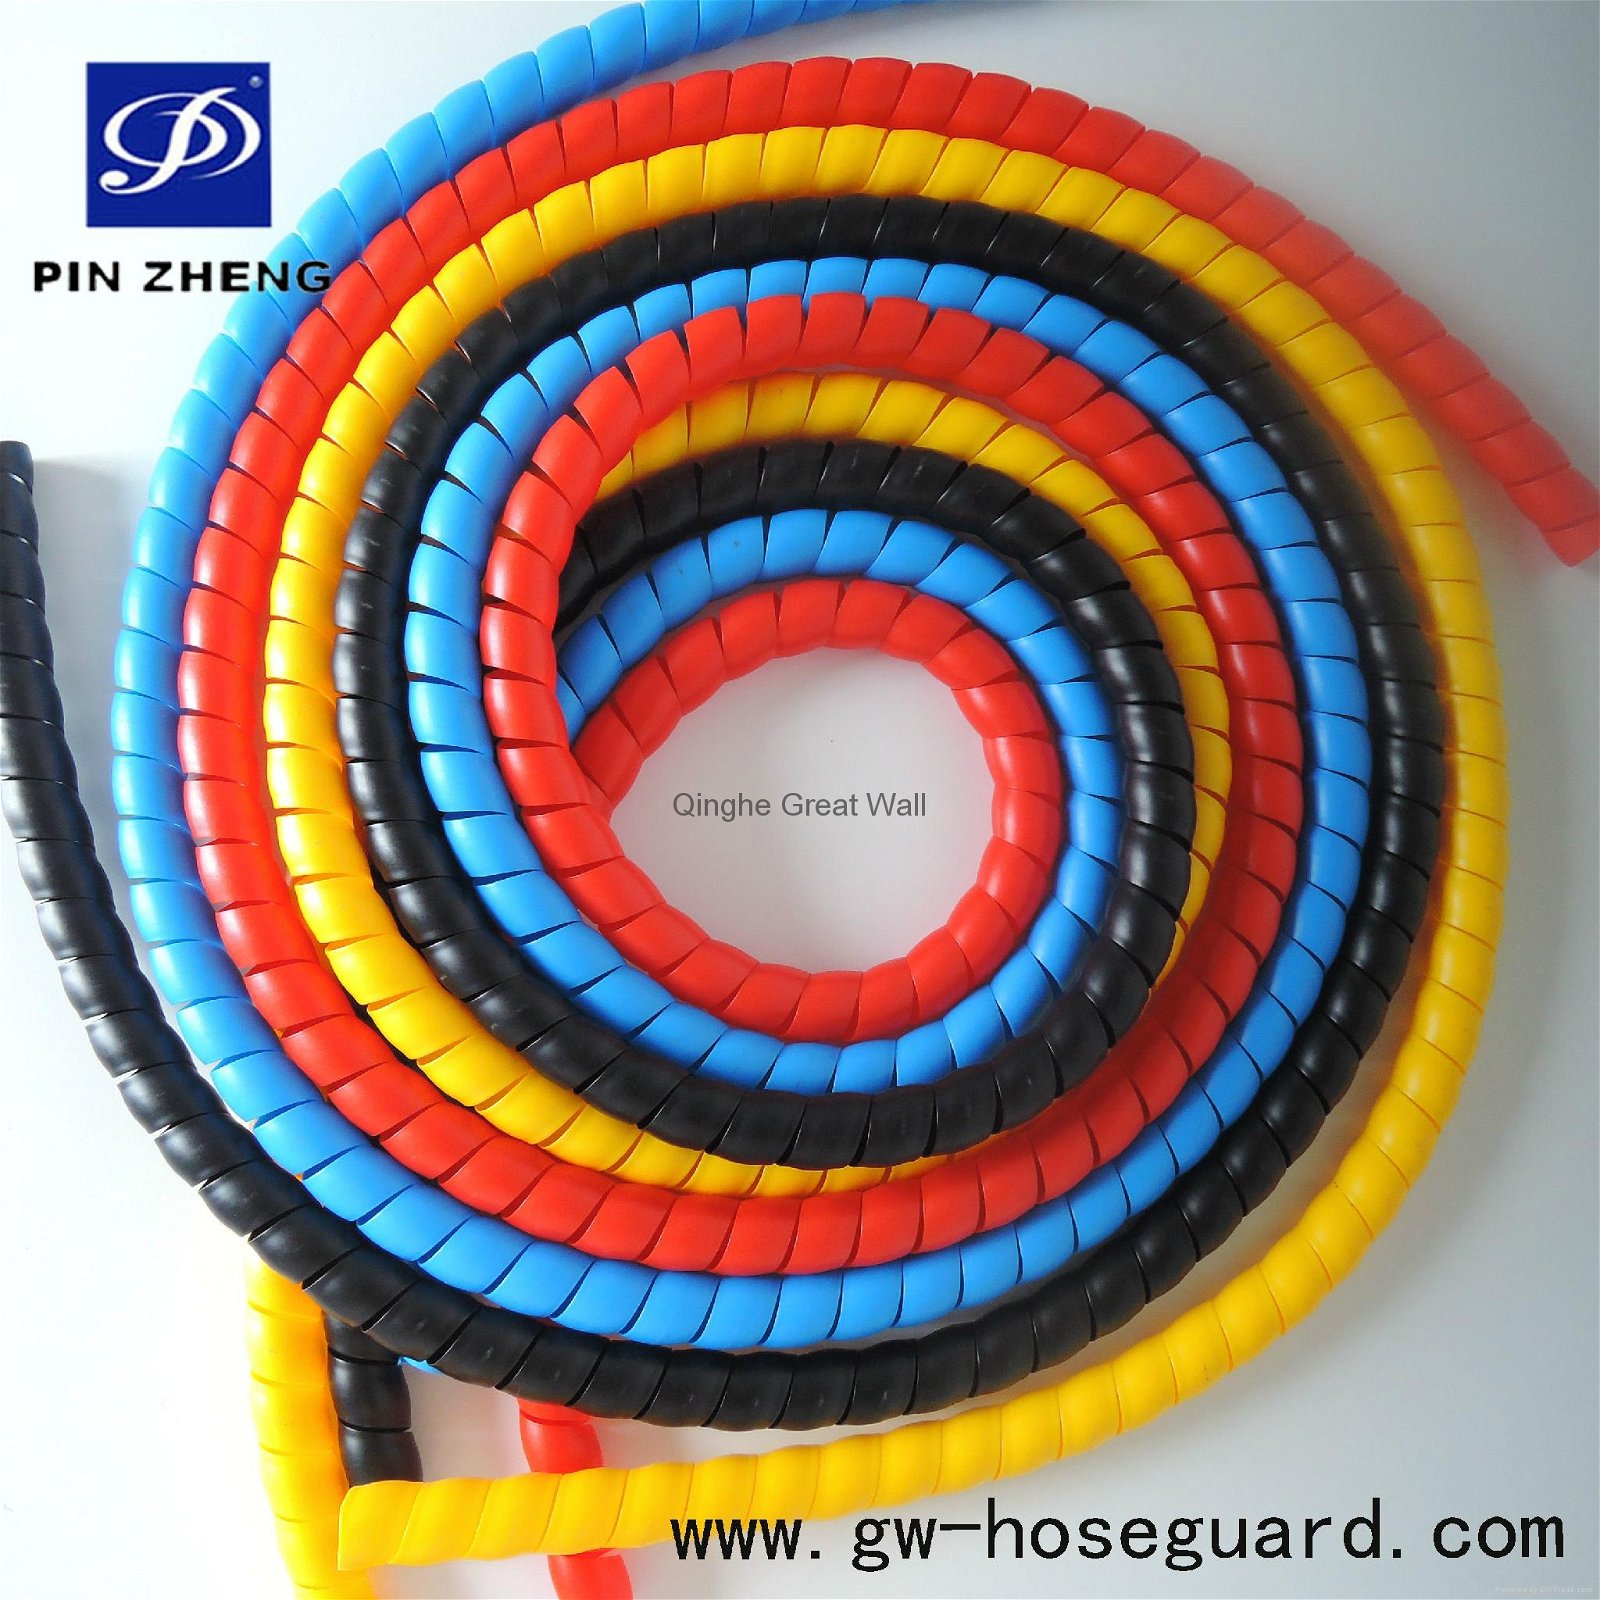 Multicolor Car Motor Bicycle Brake Line Cable Covers